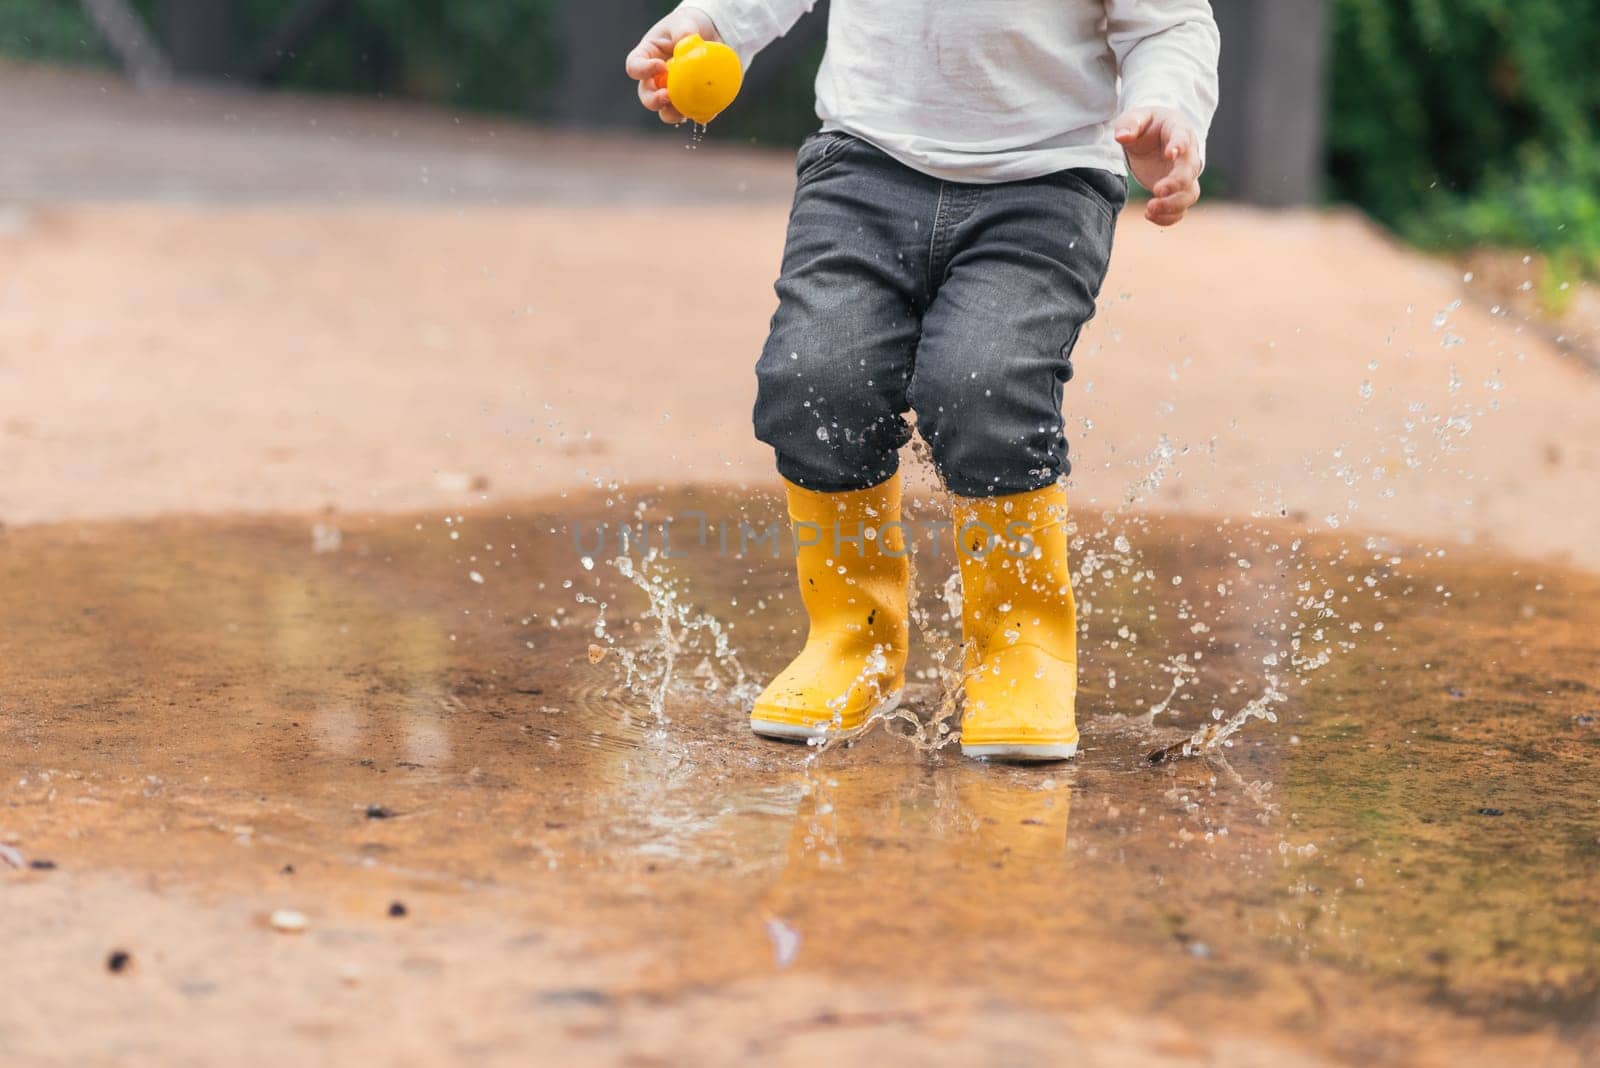 Child's feet in yellow rubber boots jumping over a puddle in the rain.